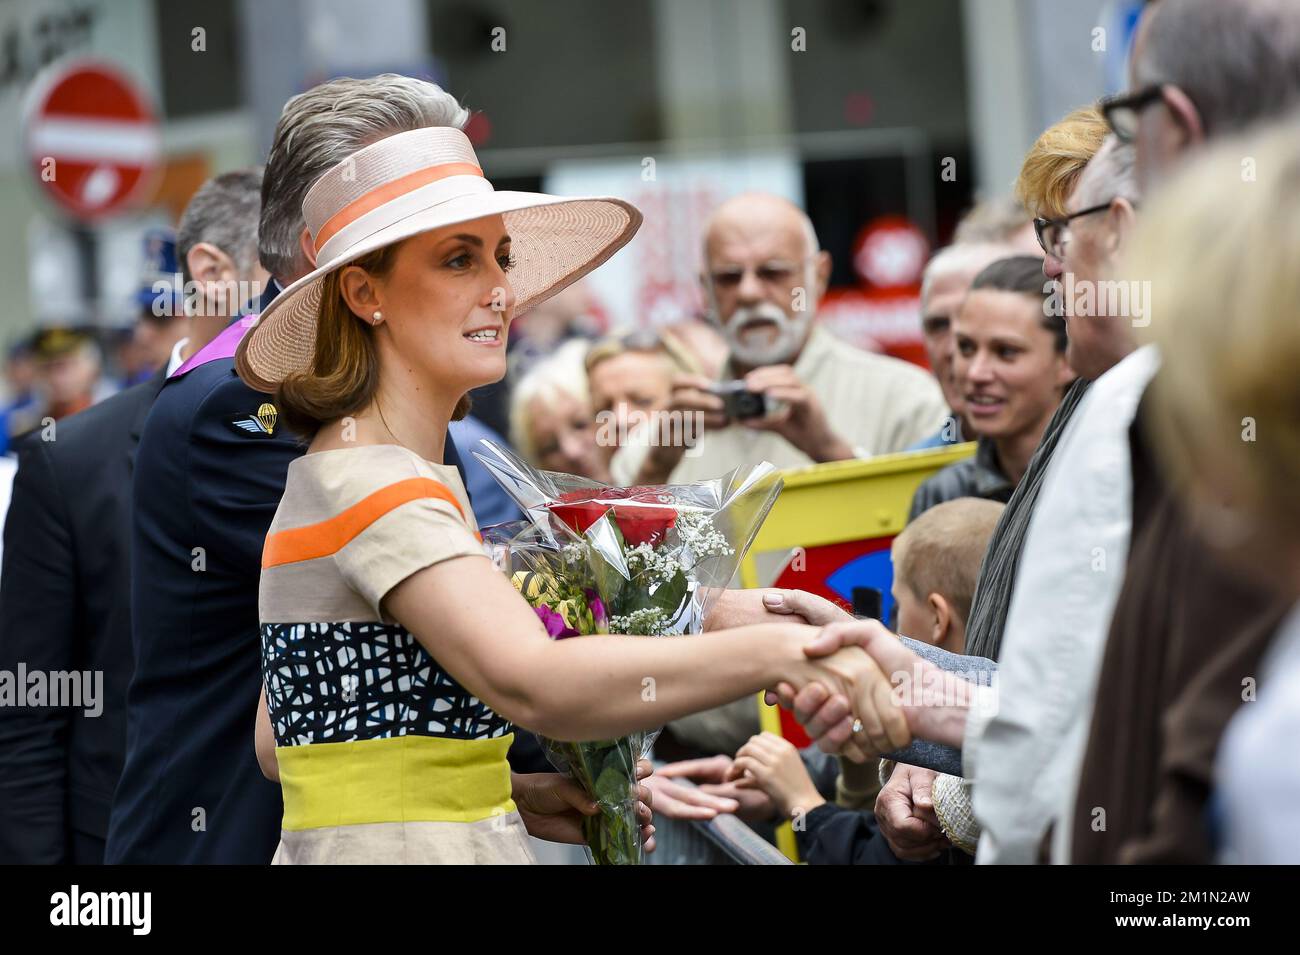 20120721 - LIEGE, BELGIUM: Princess Claire of Belgium pictured after the Te Deum mass, on the occasion of today's Belgian National Day, at the Cathedrale Saint-Paul (Sint-Pauluskathedraal) cathedral, Saturday 21 July 2012 in Liege. BELGA PHOTO NICOLAS LAMBERT Stock Photo